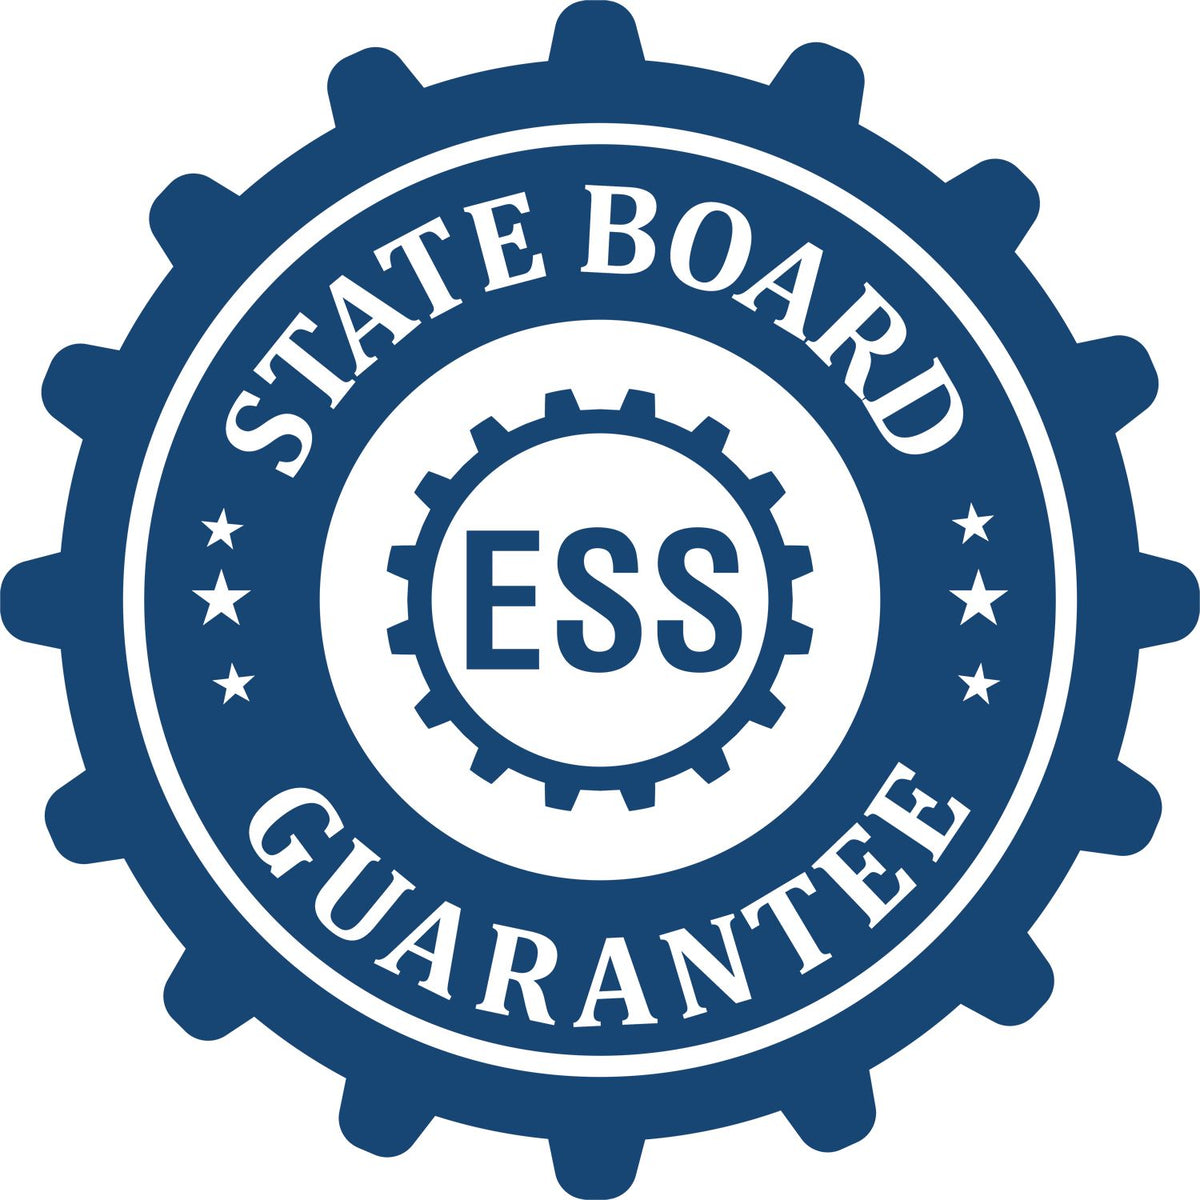 An emblem in a gear shape illustrating a state board guarantee for the Handheld Indiana Land Surveyor Seal product.